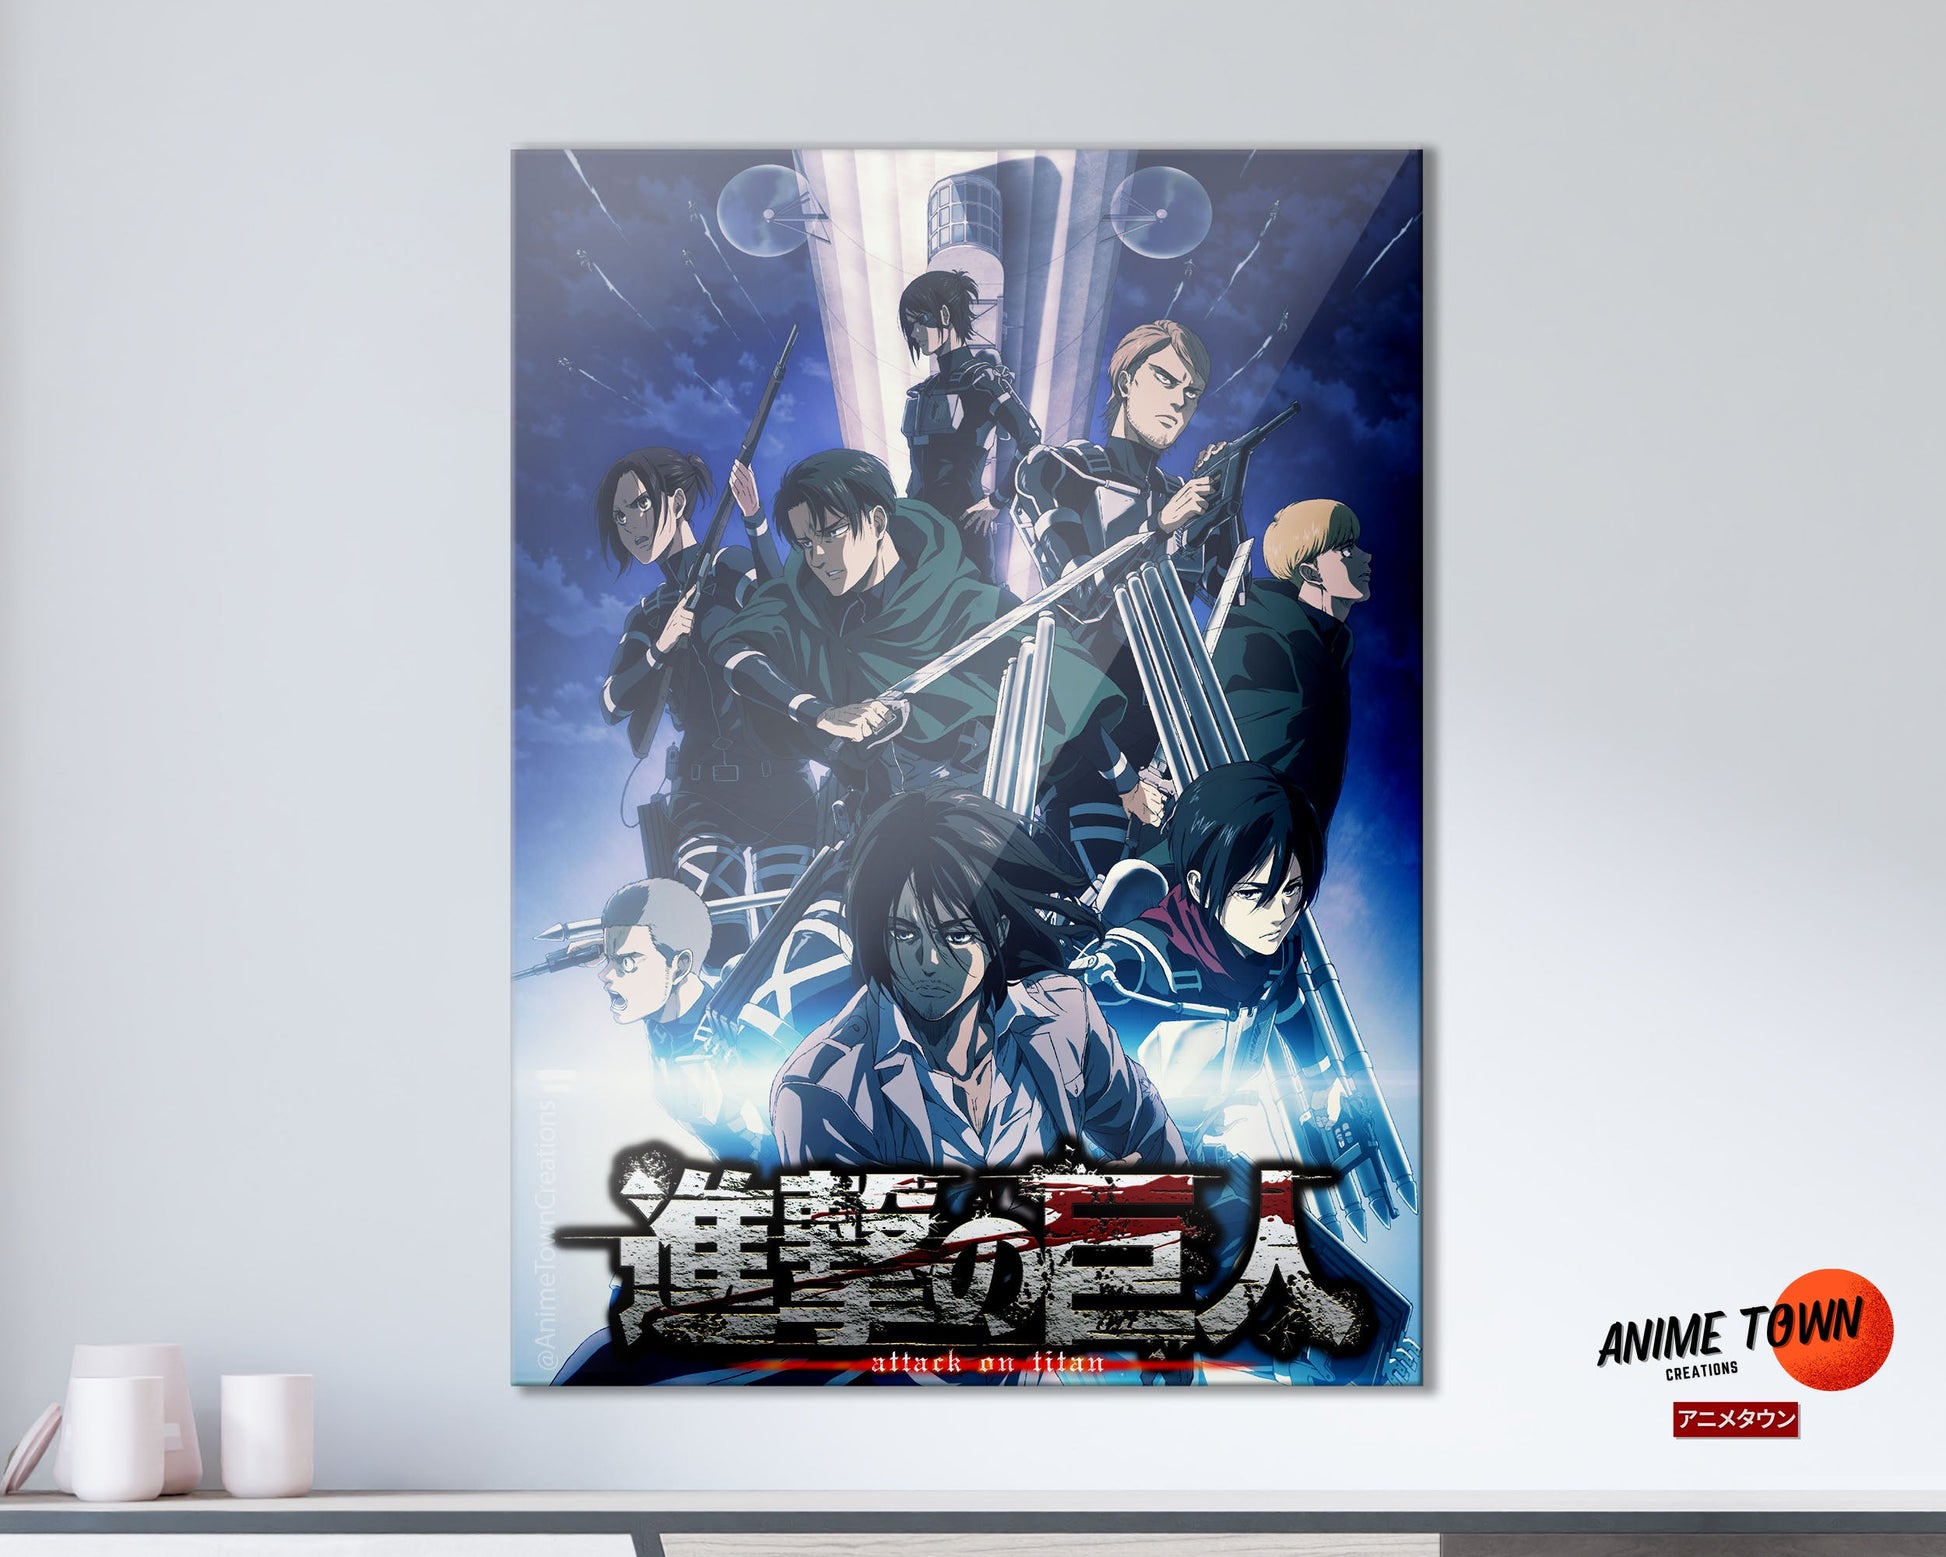 Anime Town Creations Metal Poster Attack on Titan The Final Season 11" x 17" Home Goods - Anime Attack on Titan Metal Poster